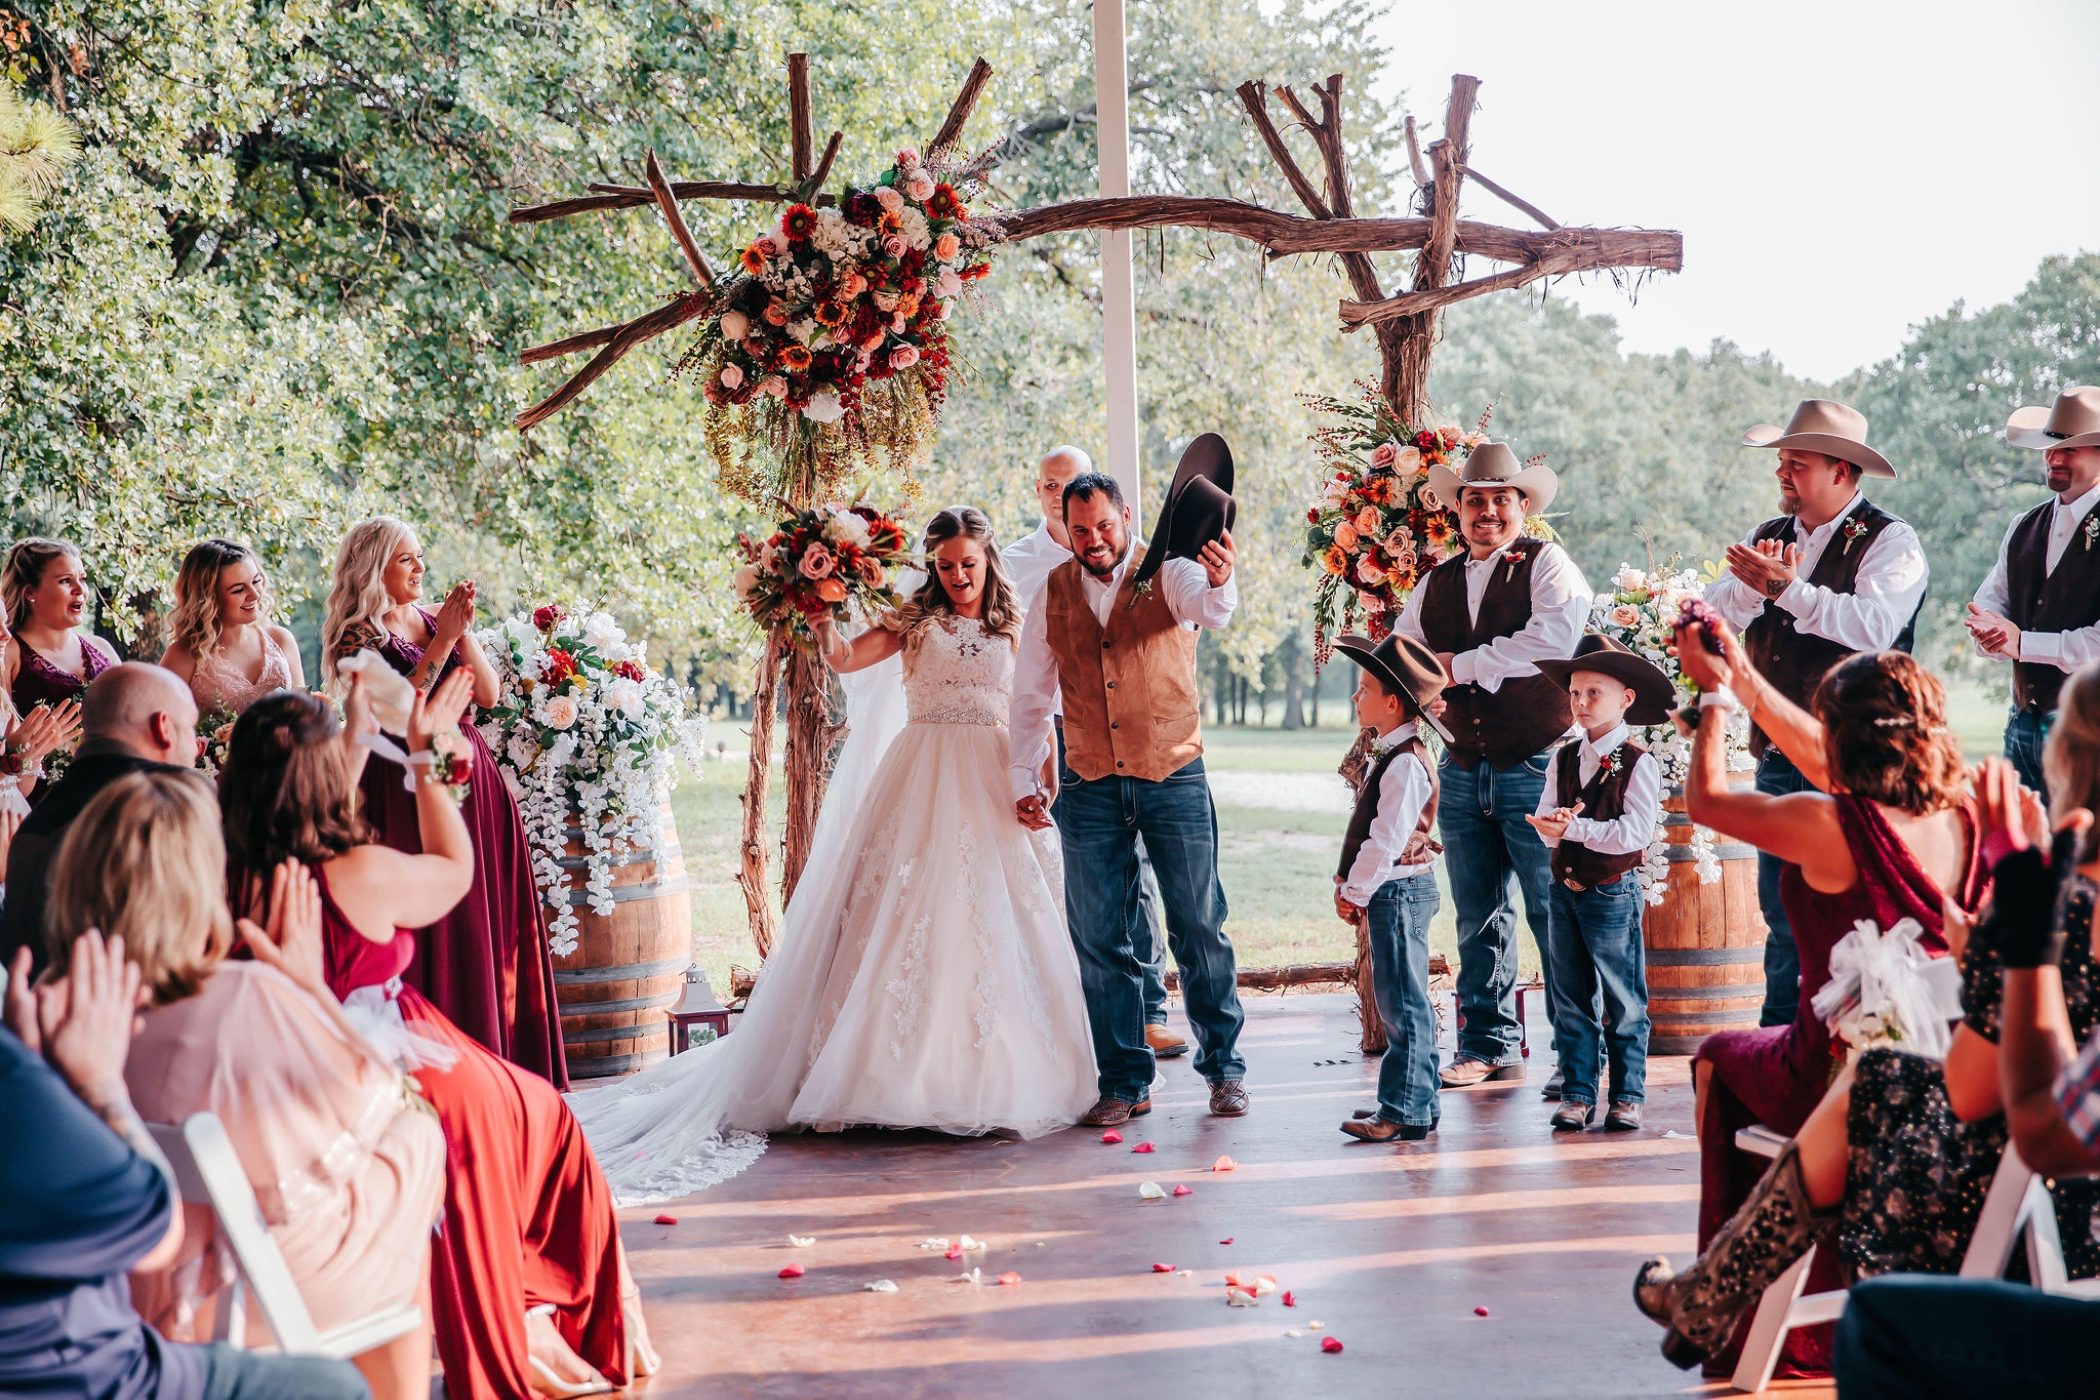 Hollow Hill Event Center Wedding and Event Venue, Weatherford, Texas. Bride and groom celebrating end of ceremony under log arch with floral decor.